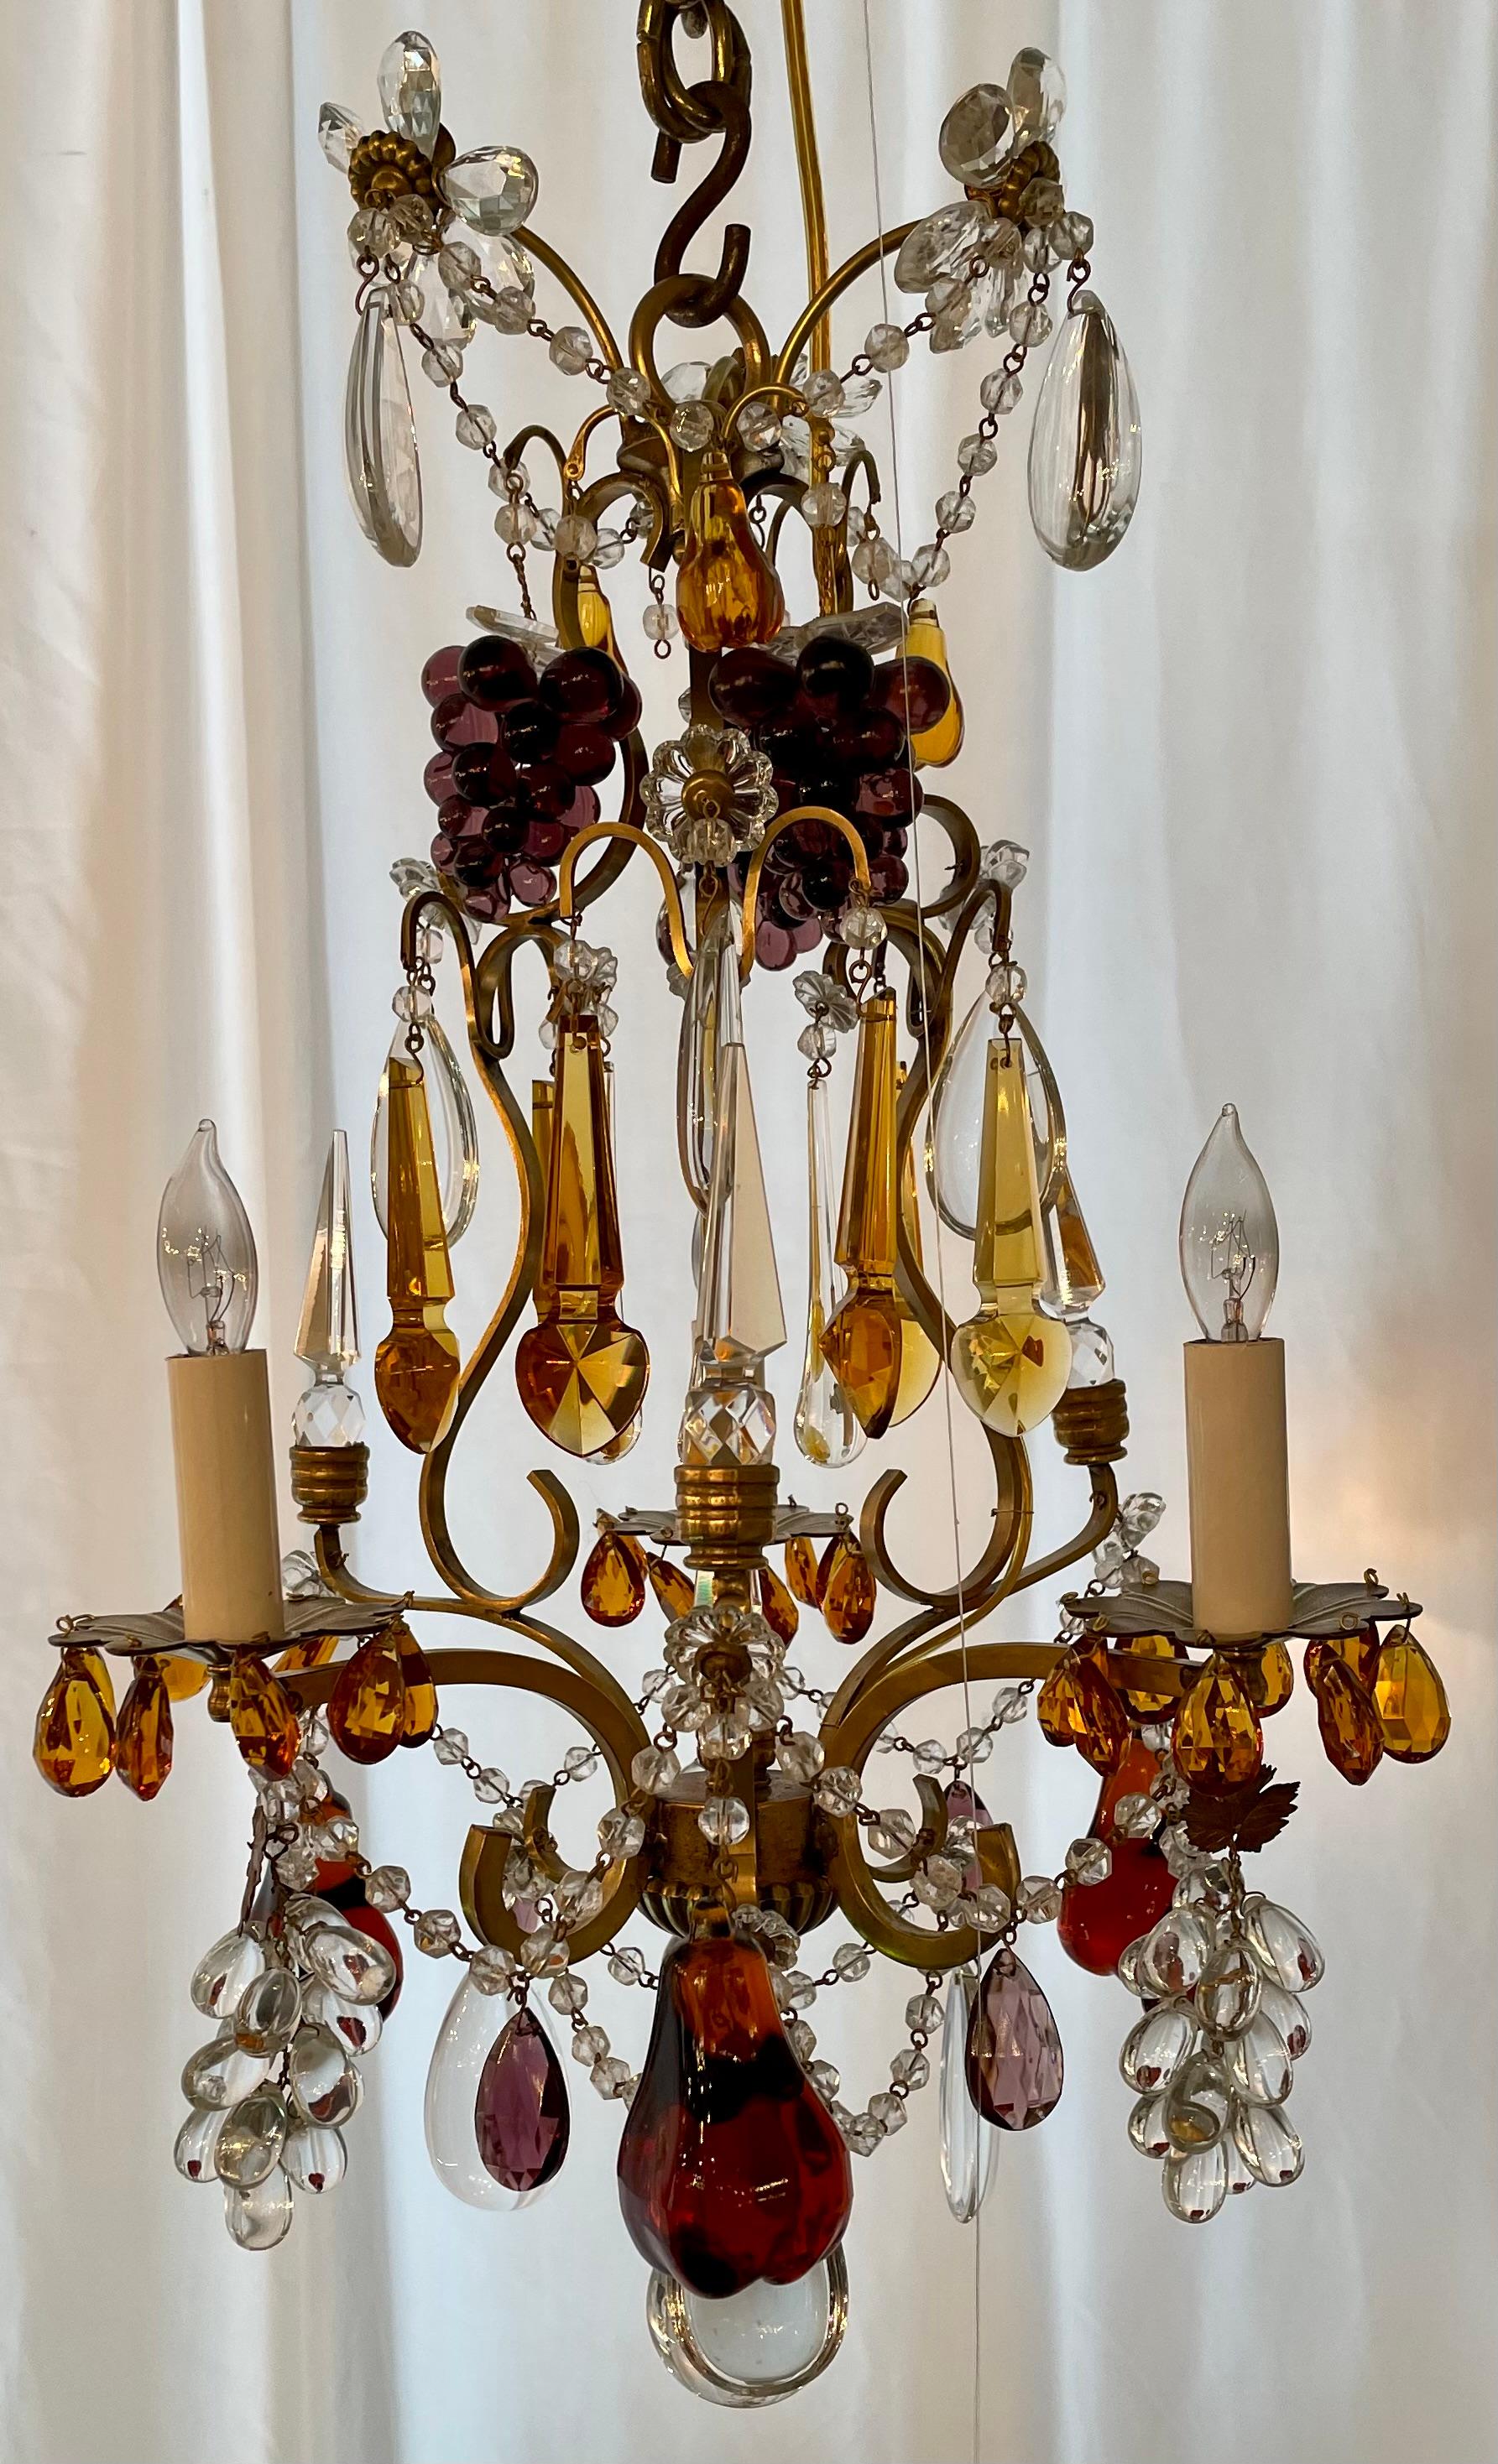 Antique French Clear & Multi-Colored Baccarat Crystal and Gold Bronze Chandelier, Circa 1880.
With purple grape clusters, dark amber pears and amethyst, amber and clear prisms.  